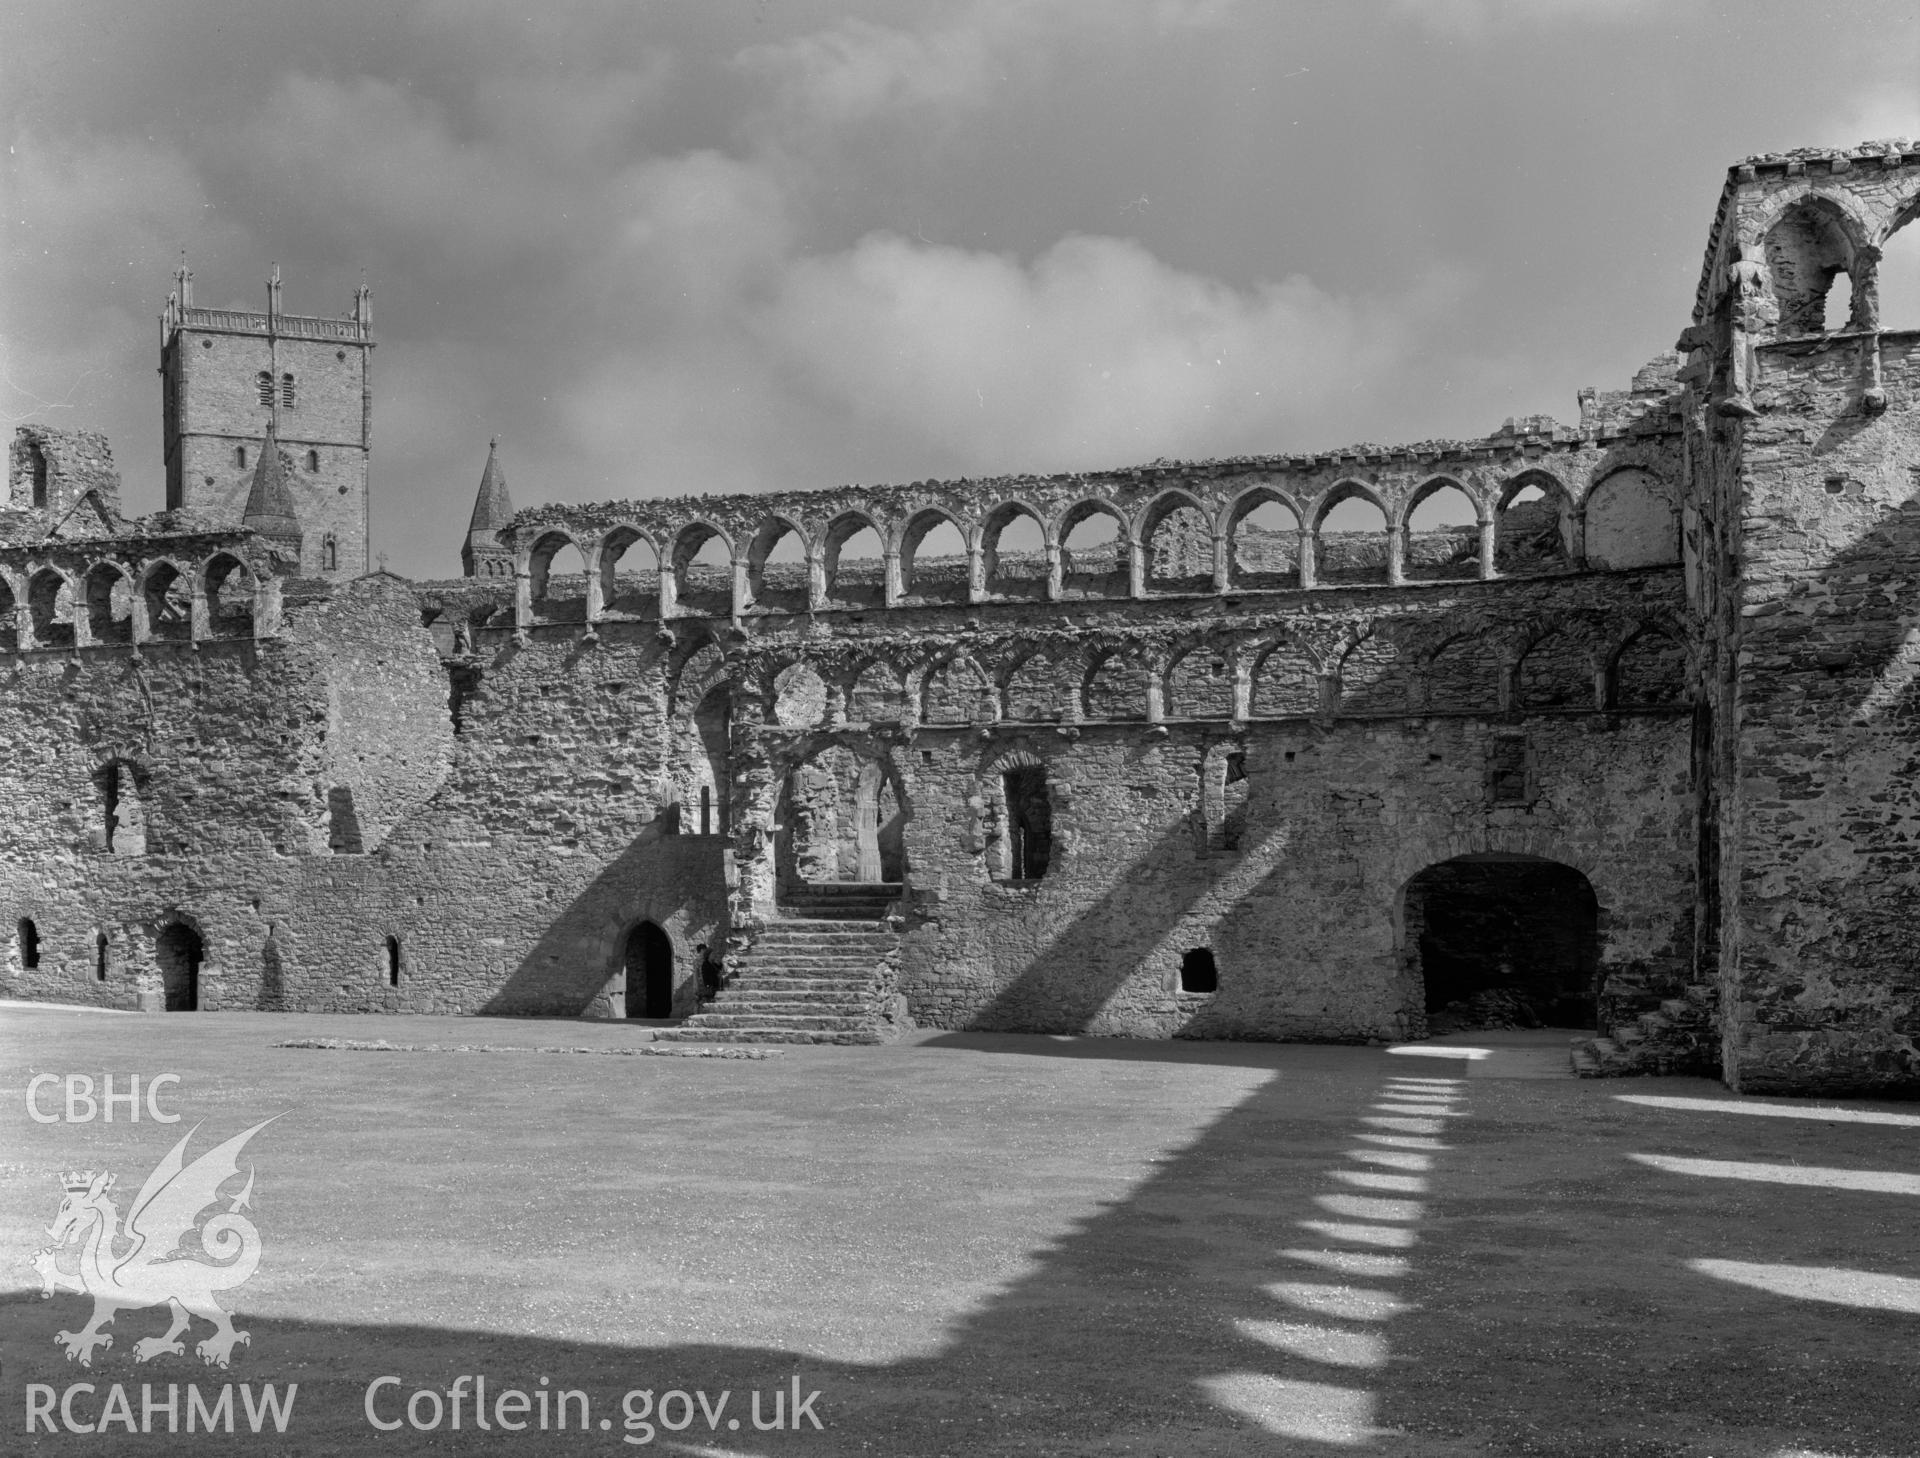 View of the ruins of the Bishops Palace, St Davids, taken 14.09.67.